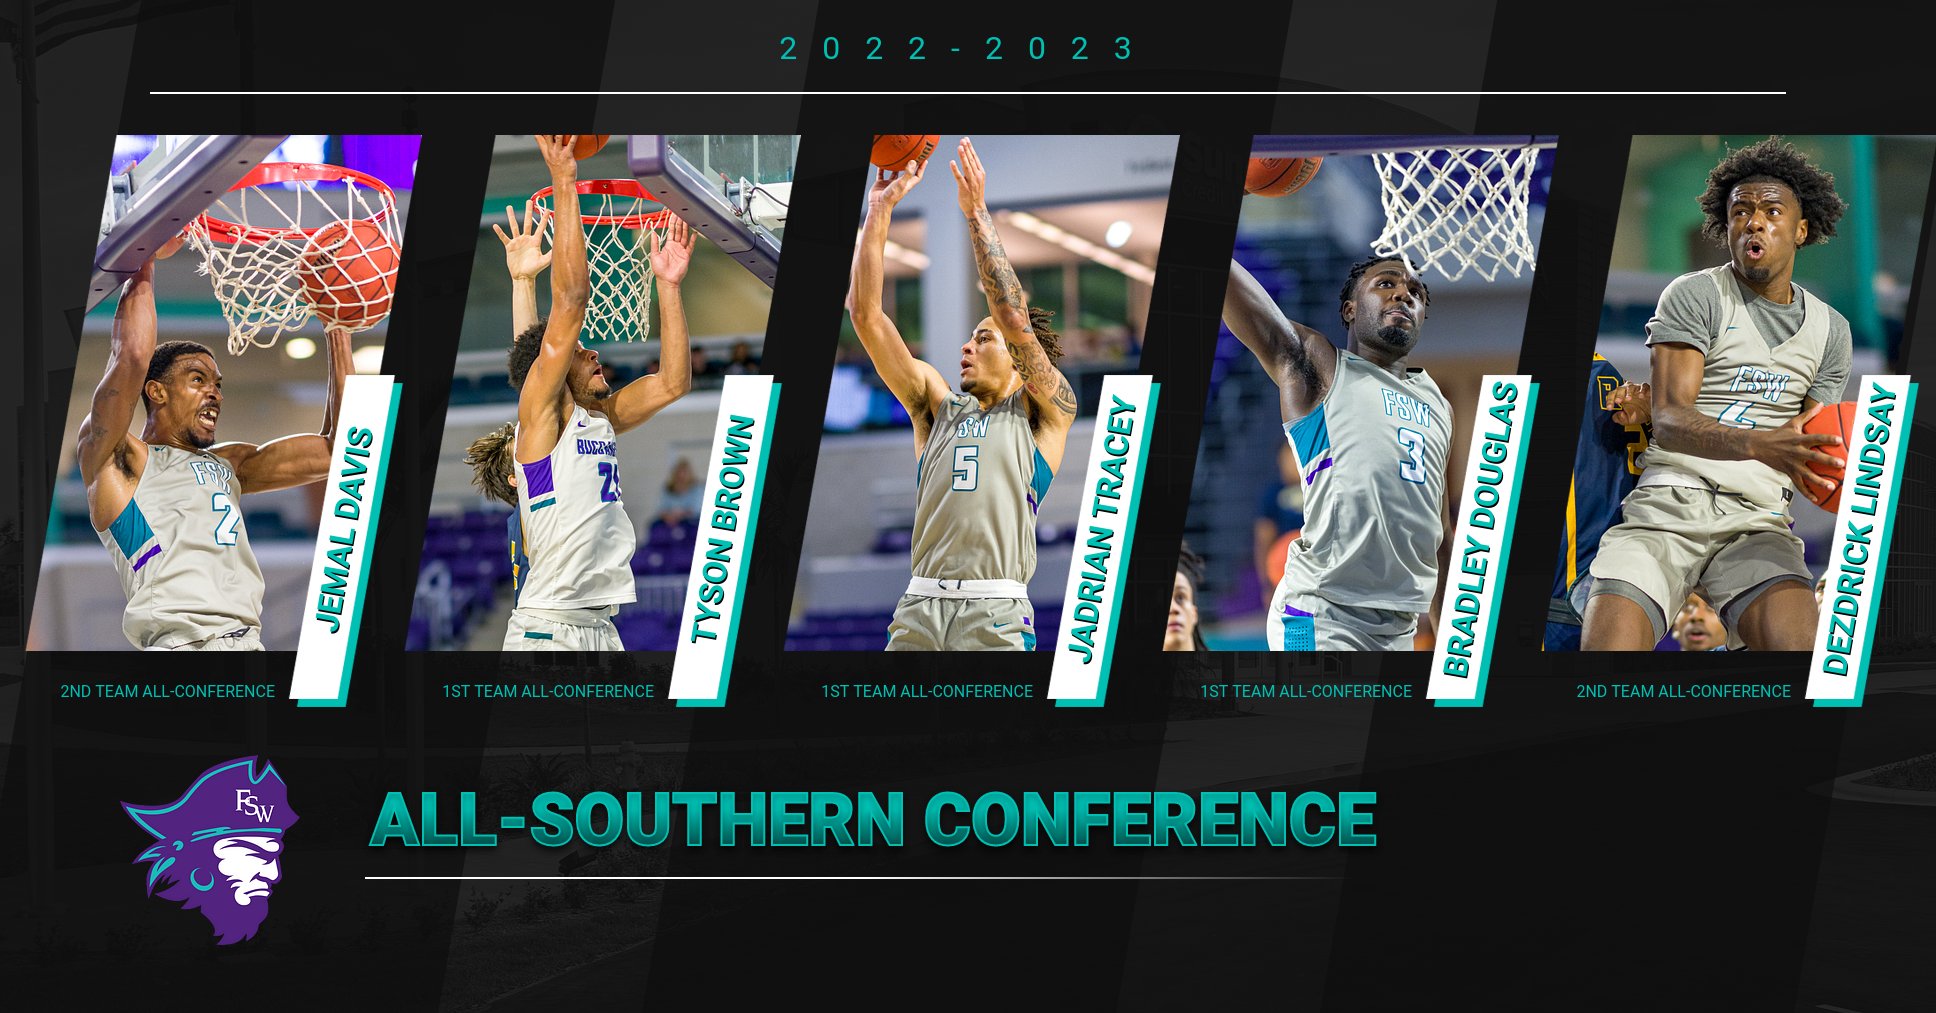 Tracey Leads Five Bucs On All-Southern Conference Team